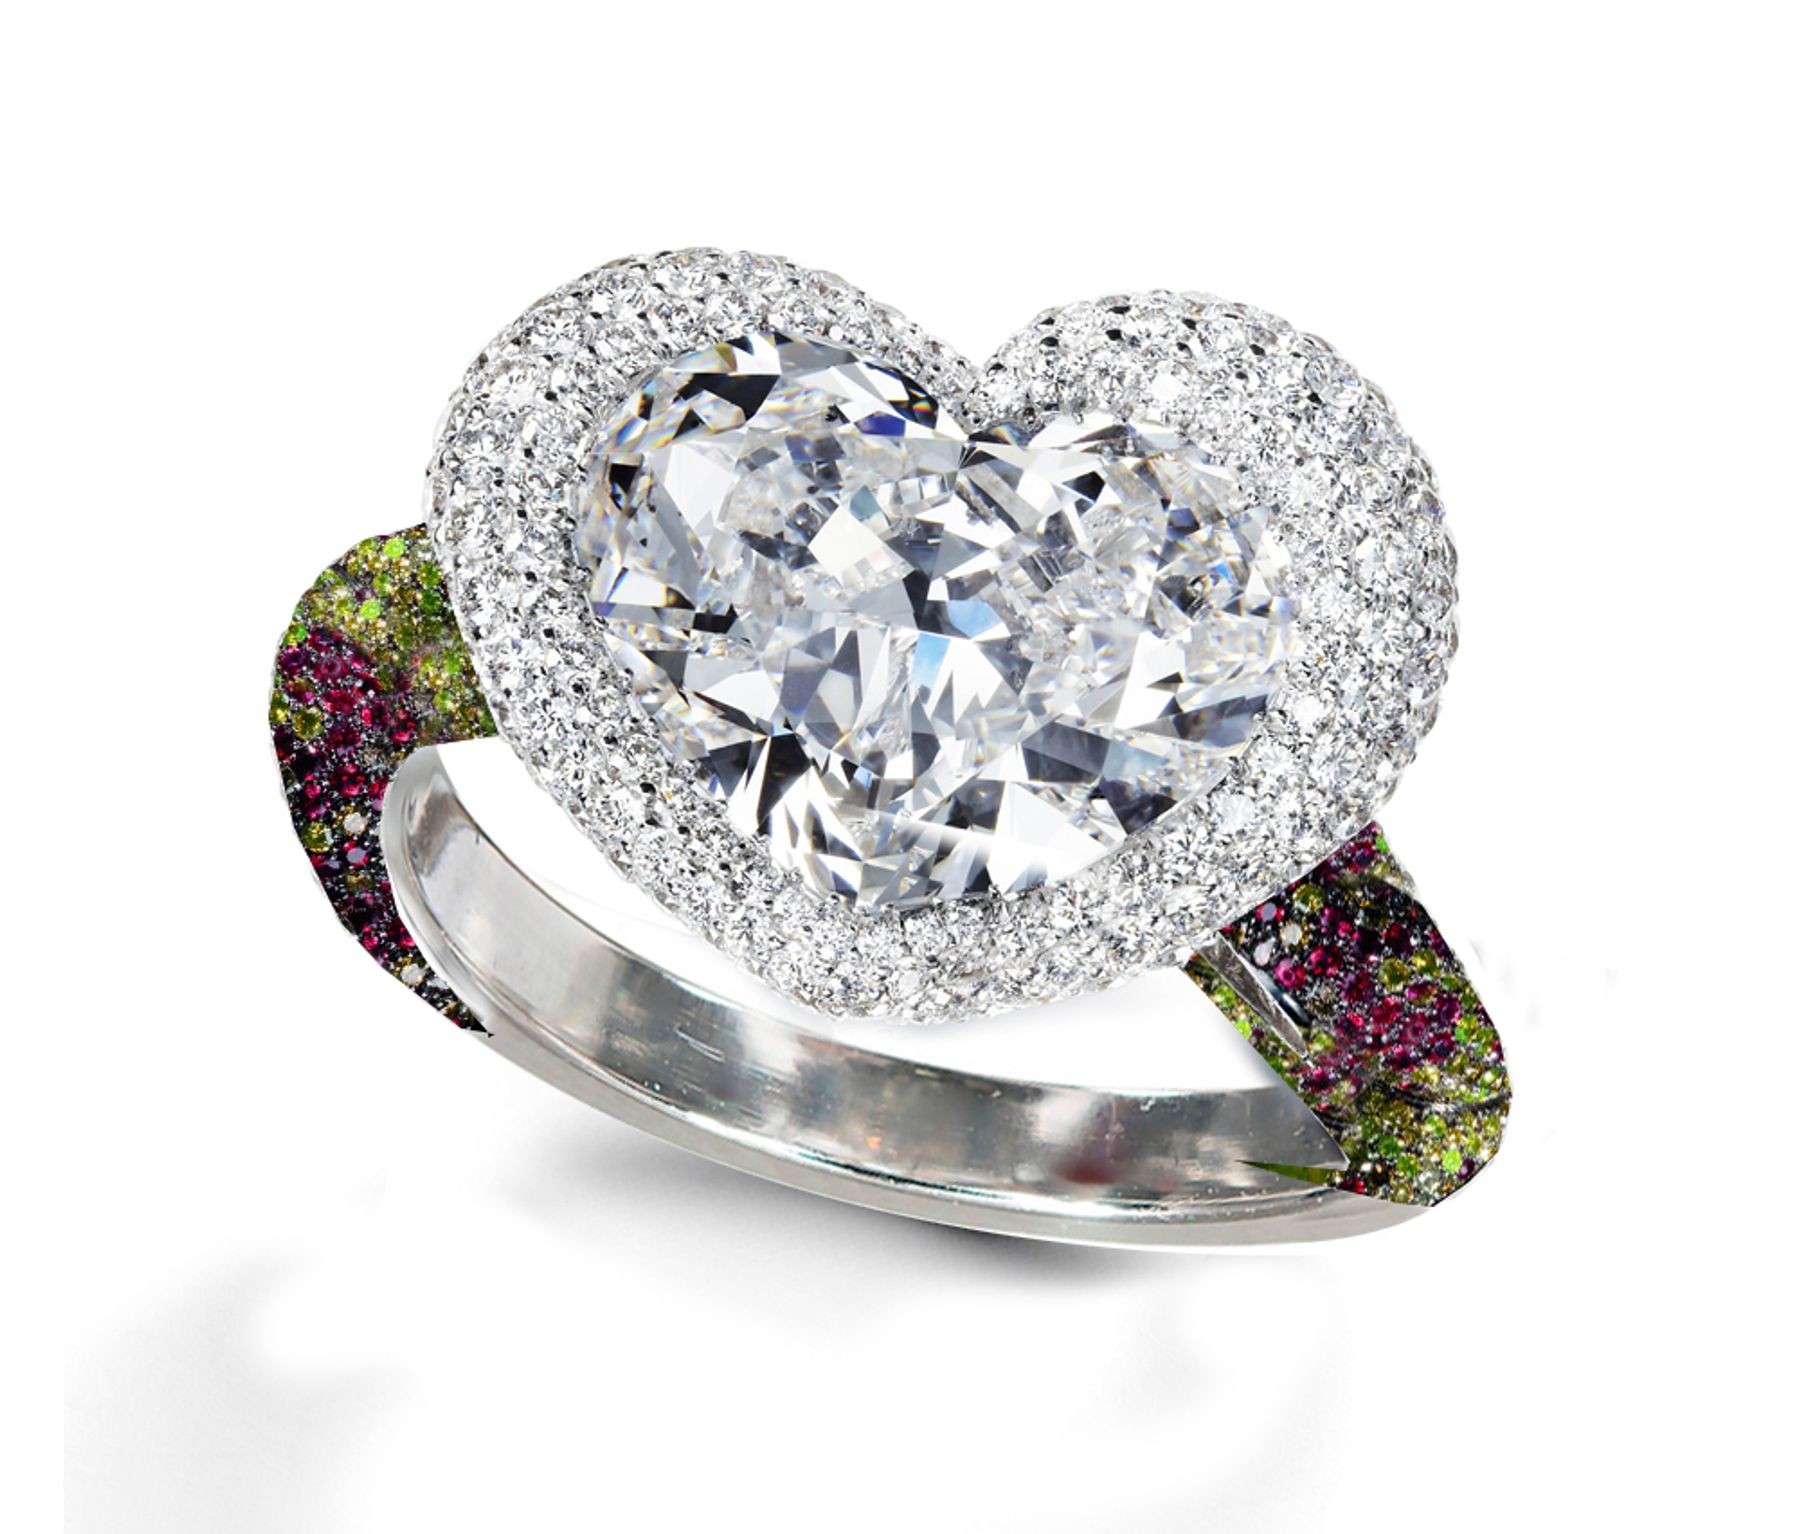 Ring with Heart Diamond & Pave Set Rainbow Sapphires & White Diamonds in Gold or Platinum